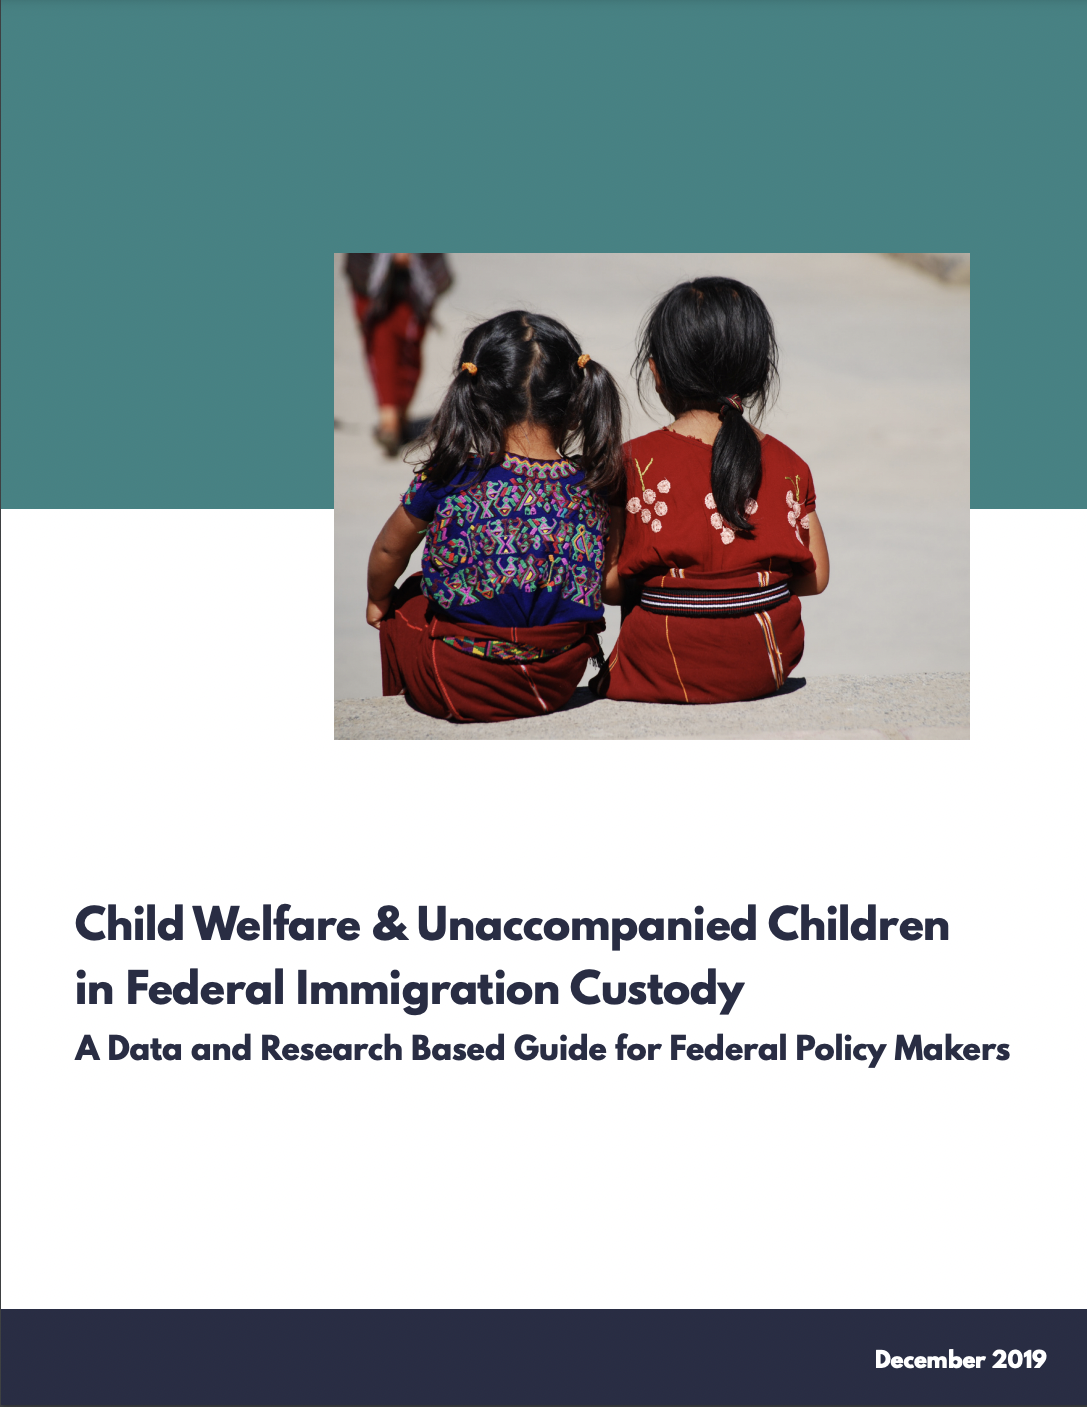 Report Cover with photo from behind of two children sitting